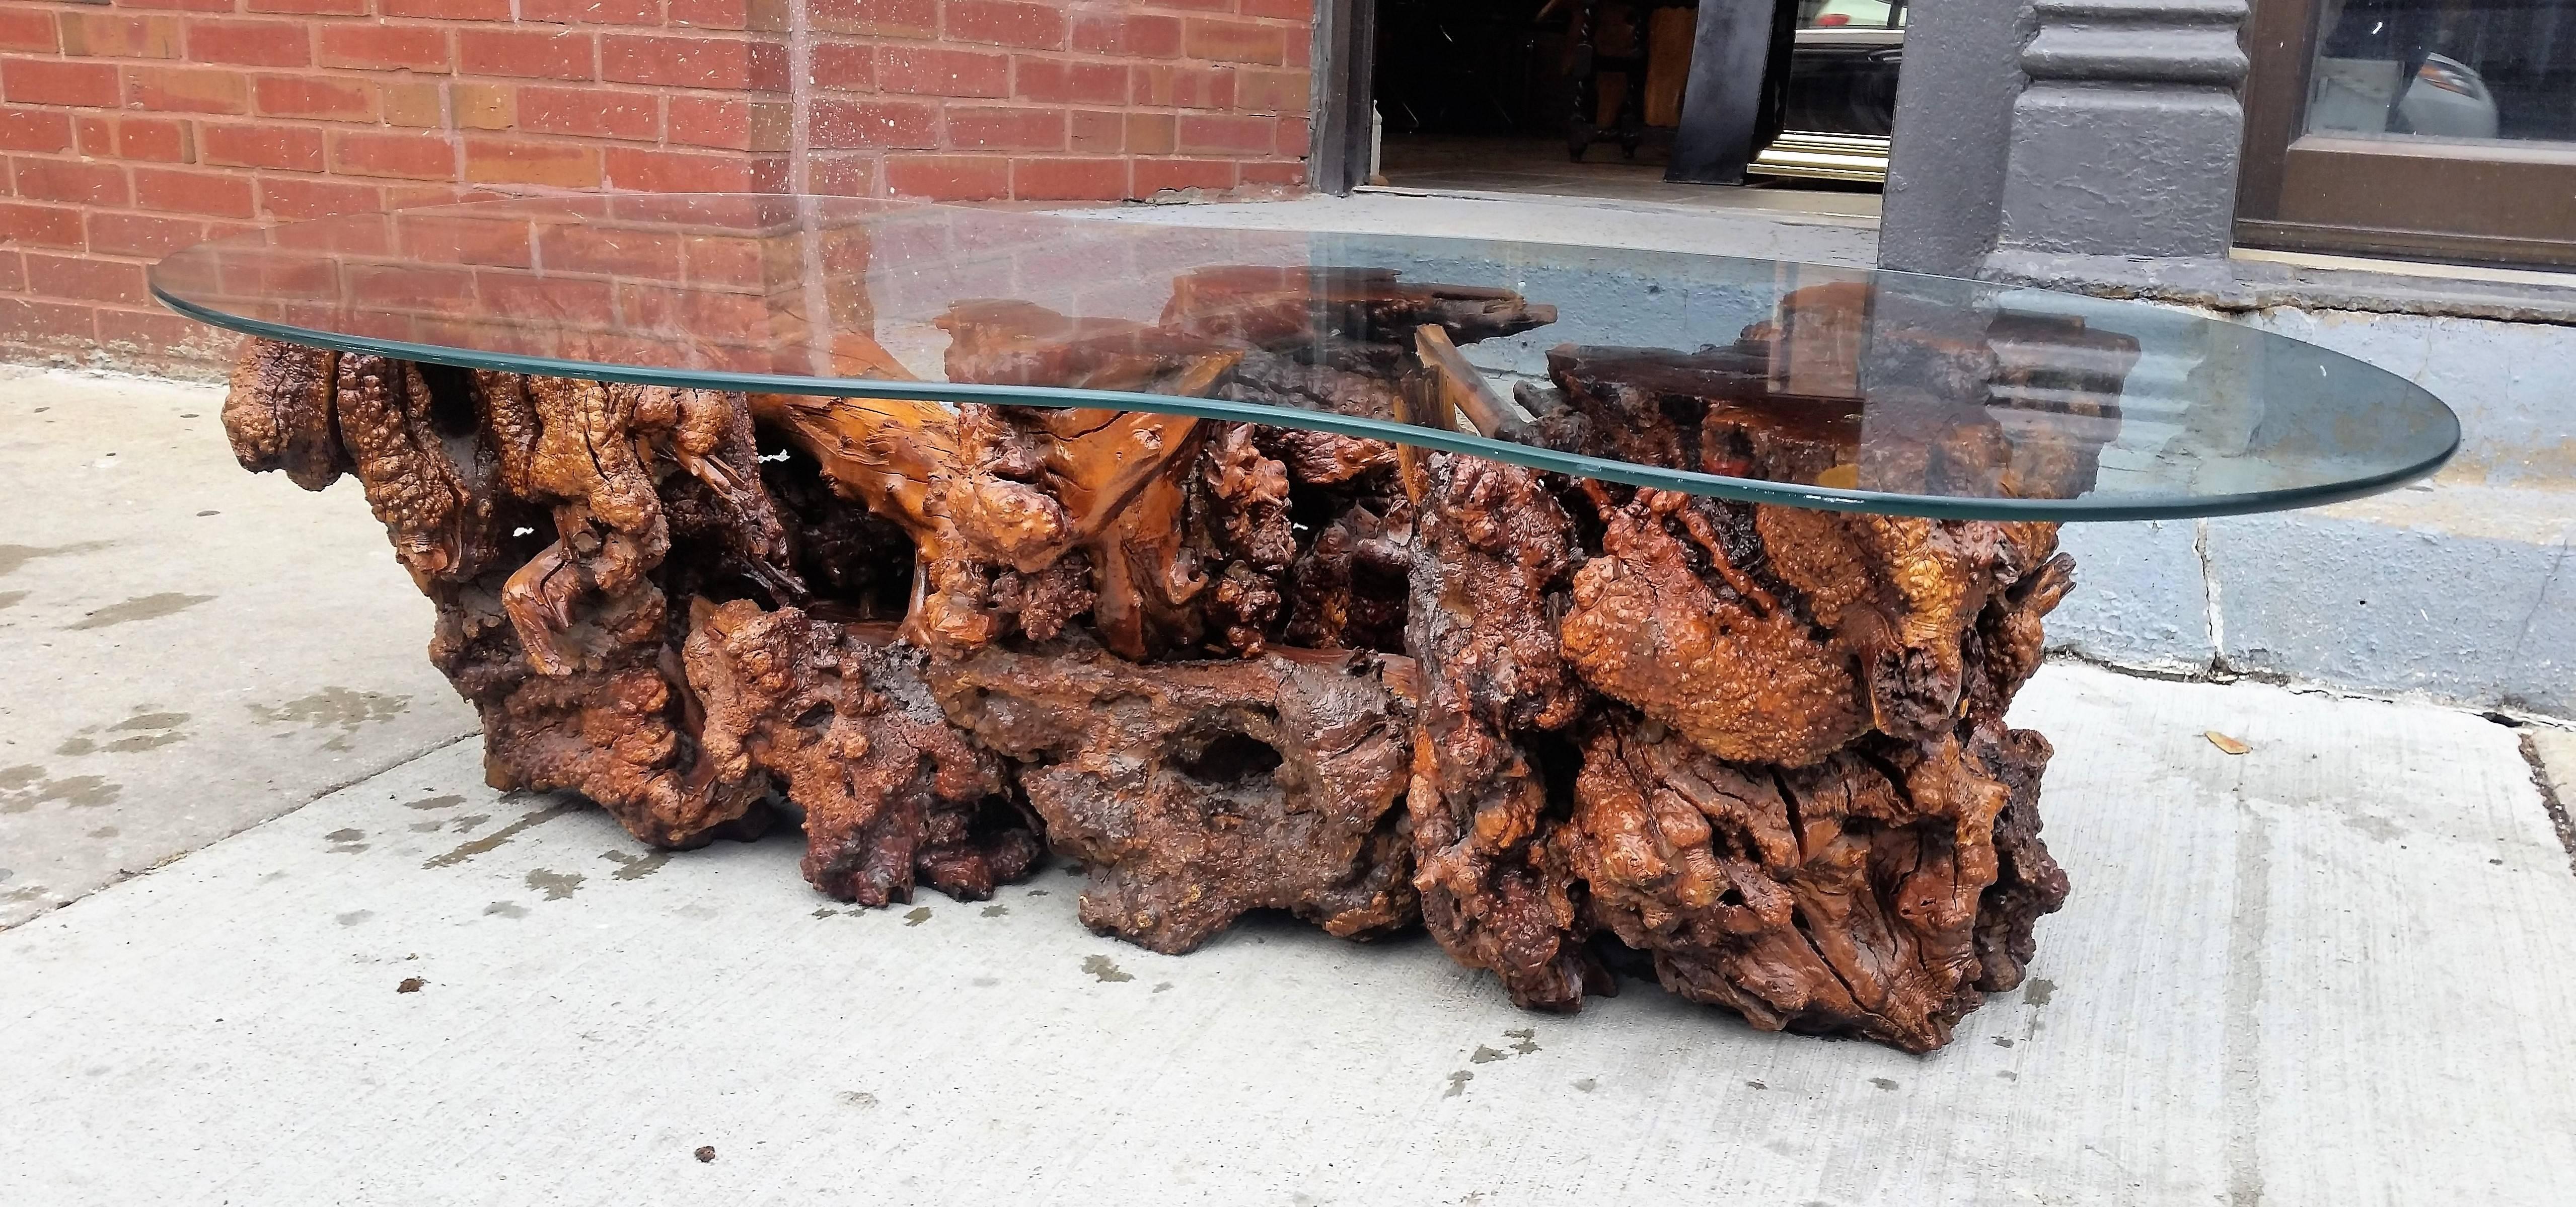 A highly sculptural organic natural burled coffee table.
The table constructed of multiple burls joined together.
Its glass top is kidney shaped.